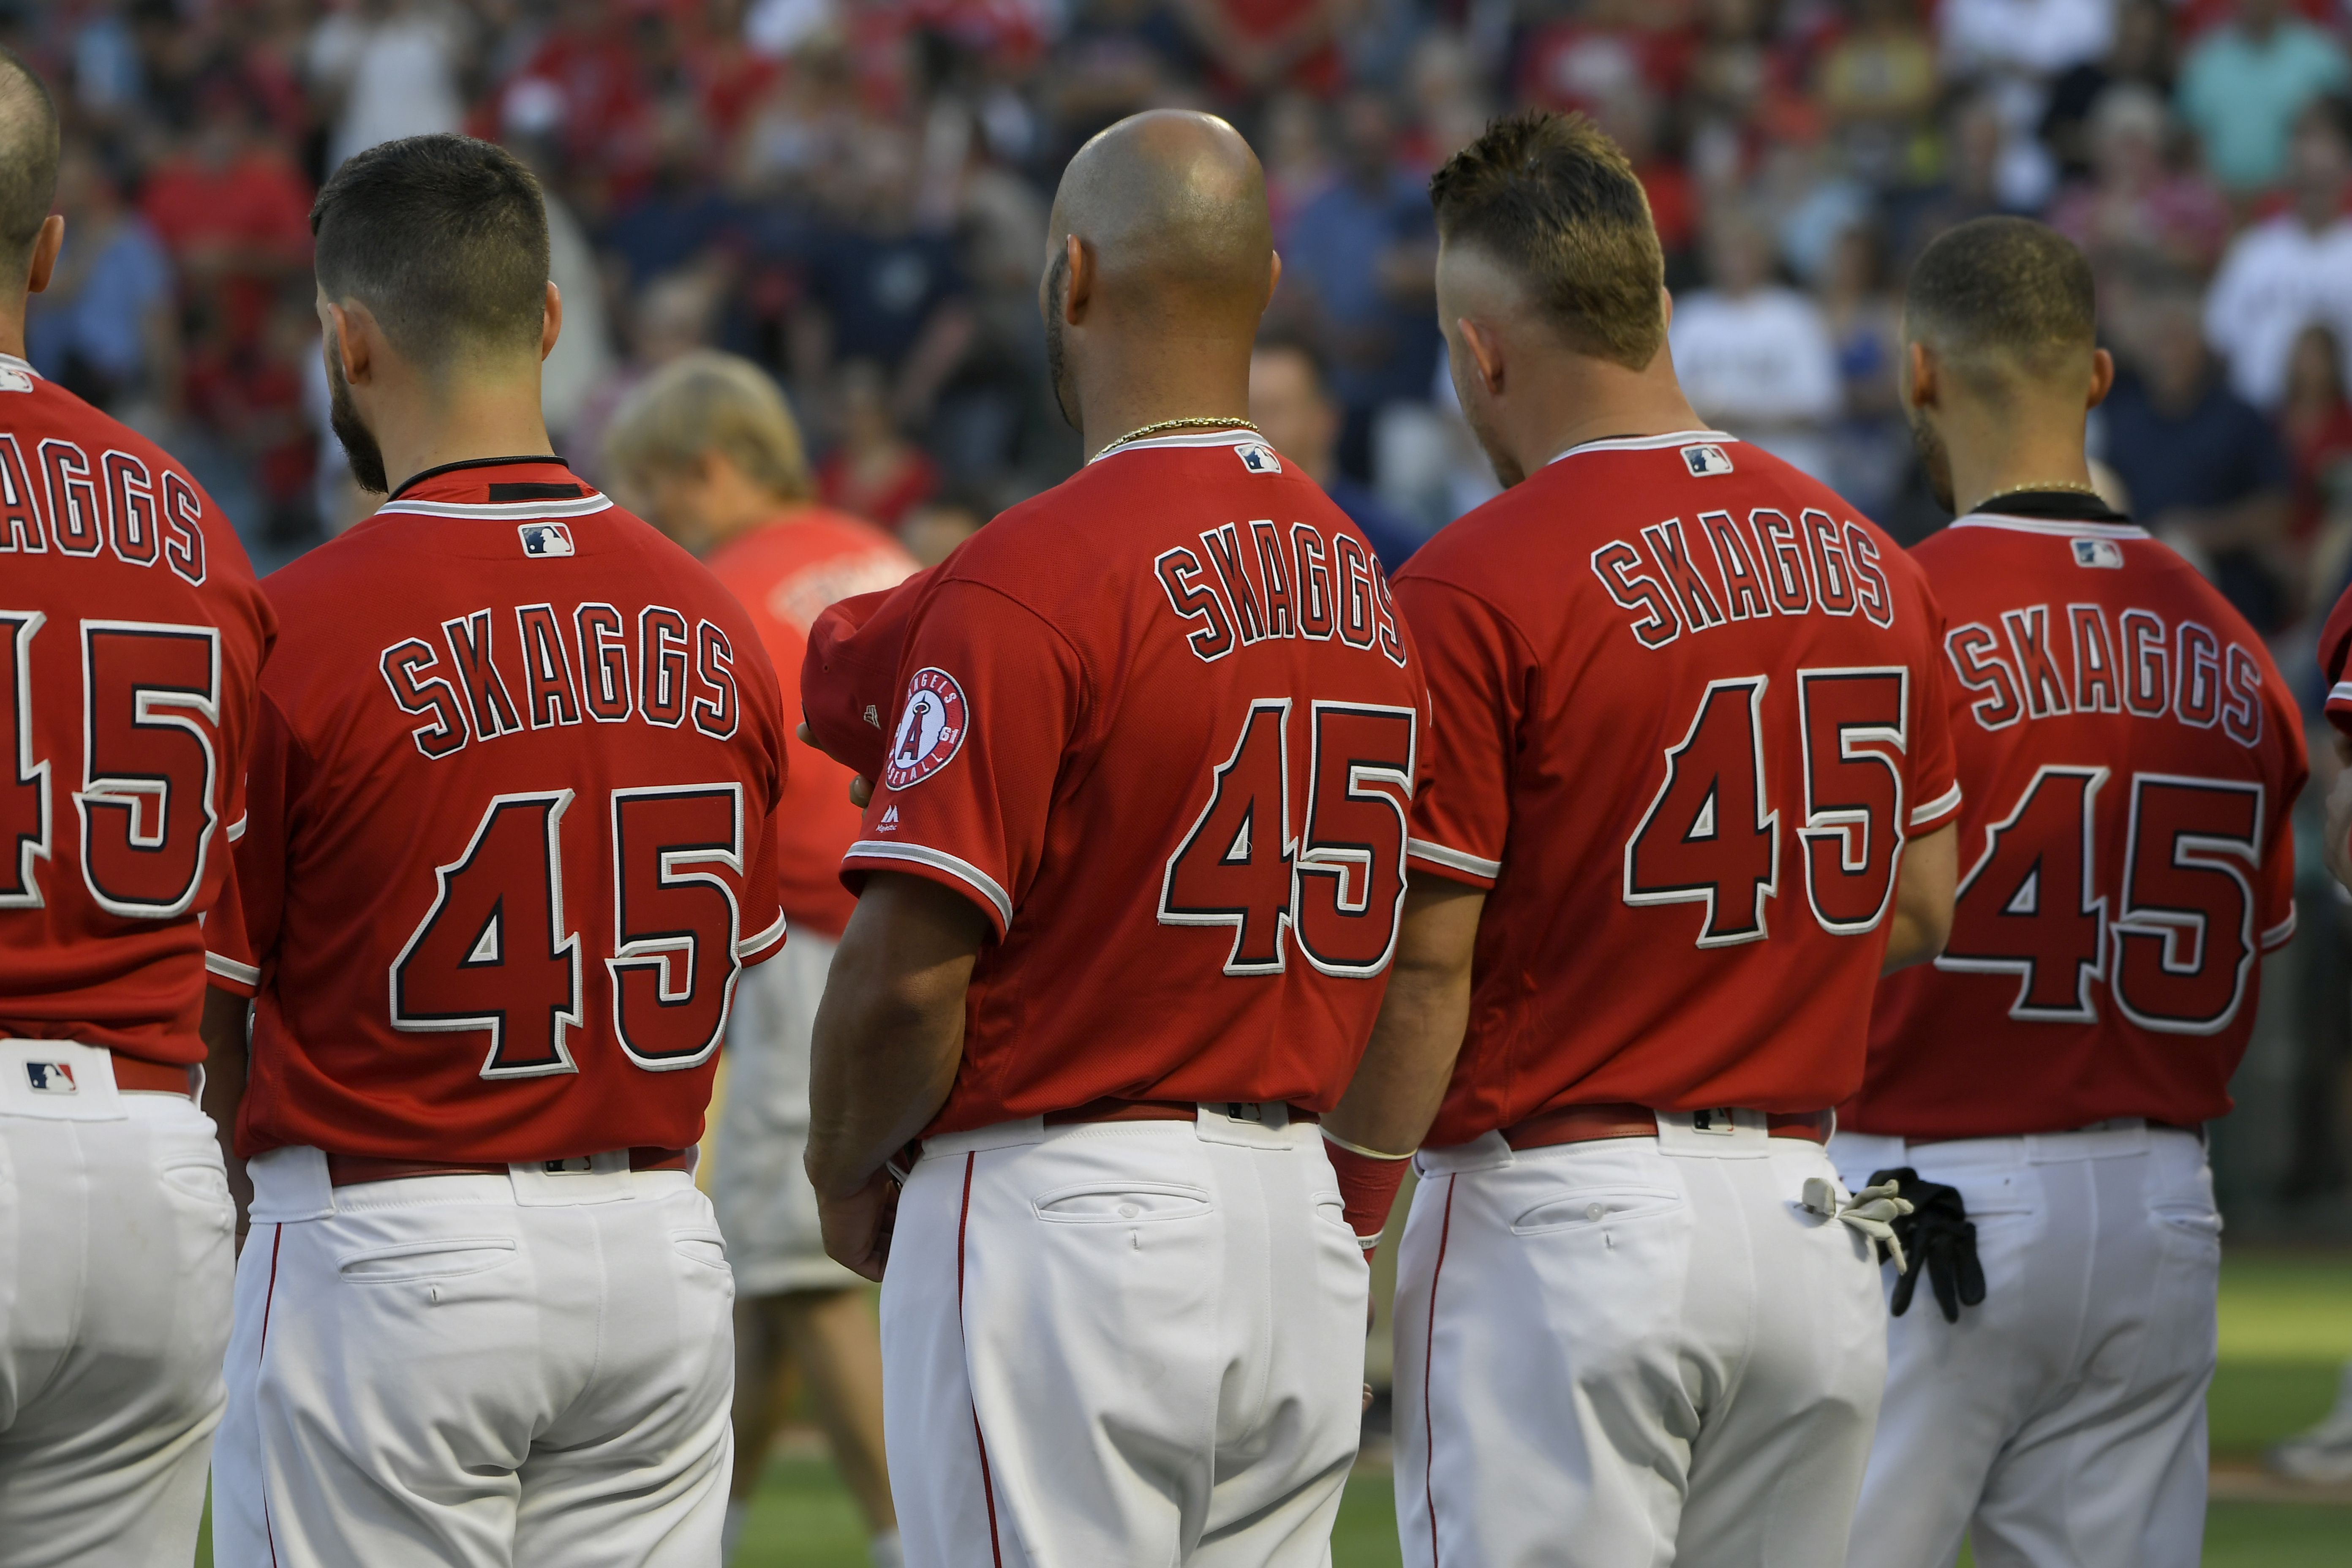 Angels honor Skaggs with emotional no-hit masterpiece - The Boston